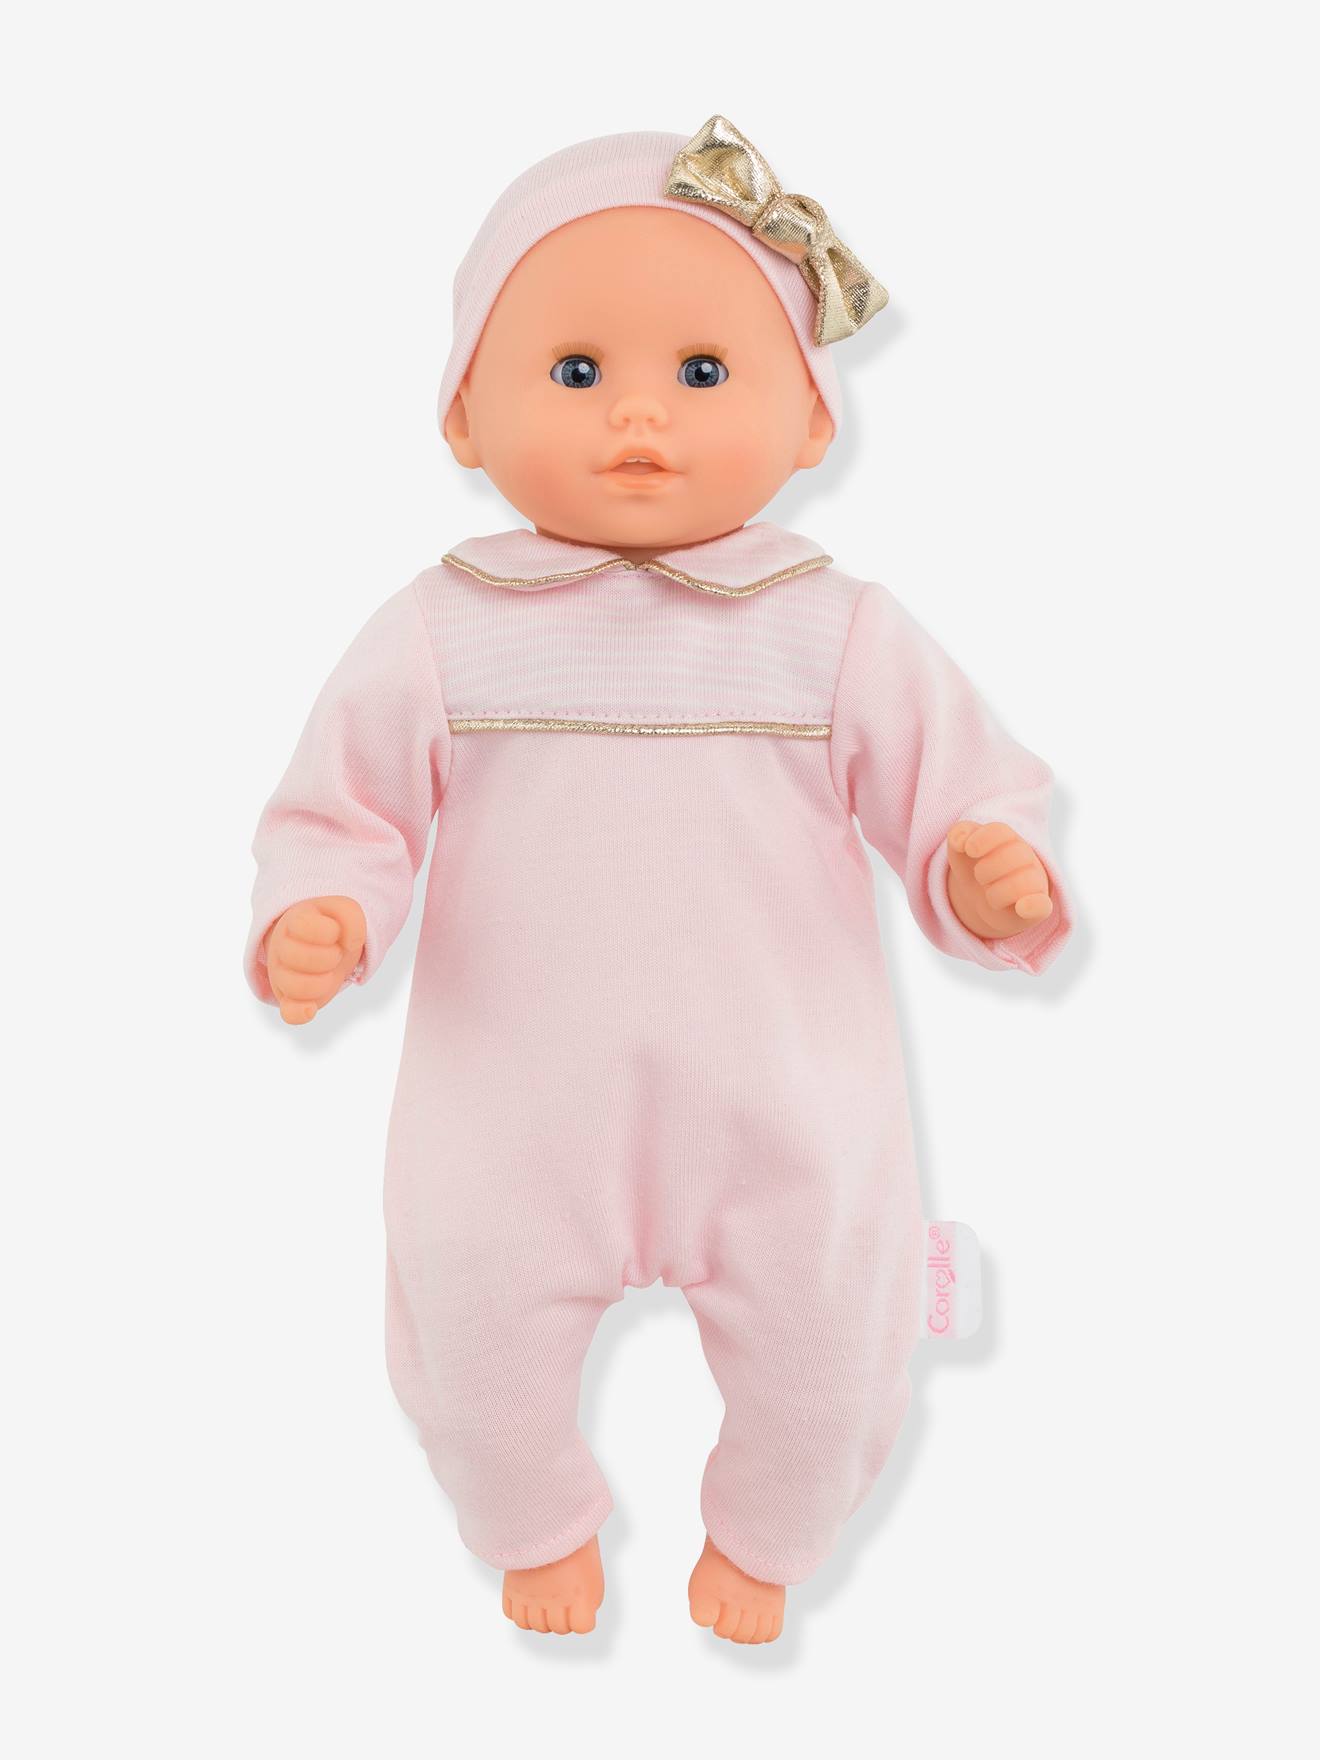 Baby Doll Calin - Manon, by COROLLE light pink